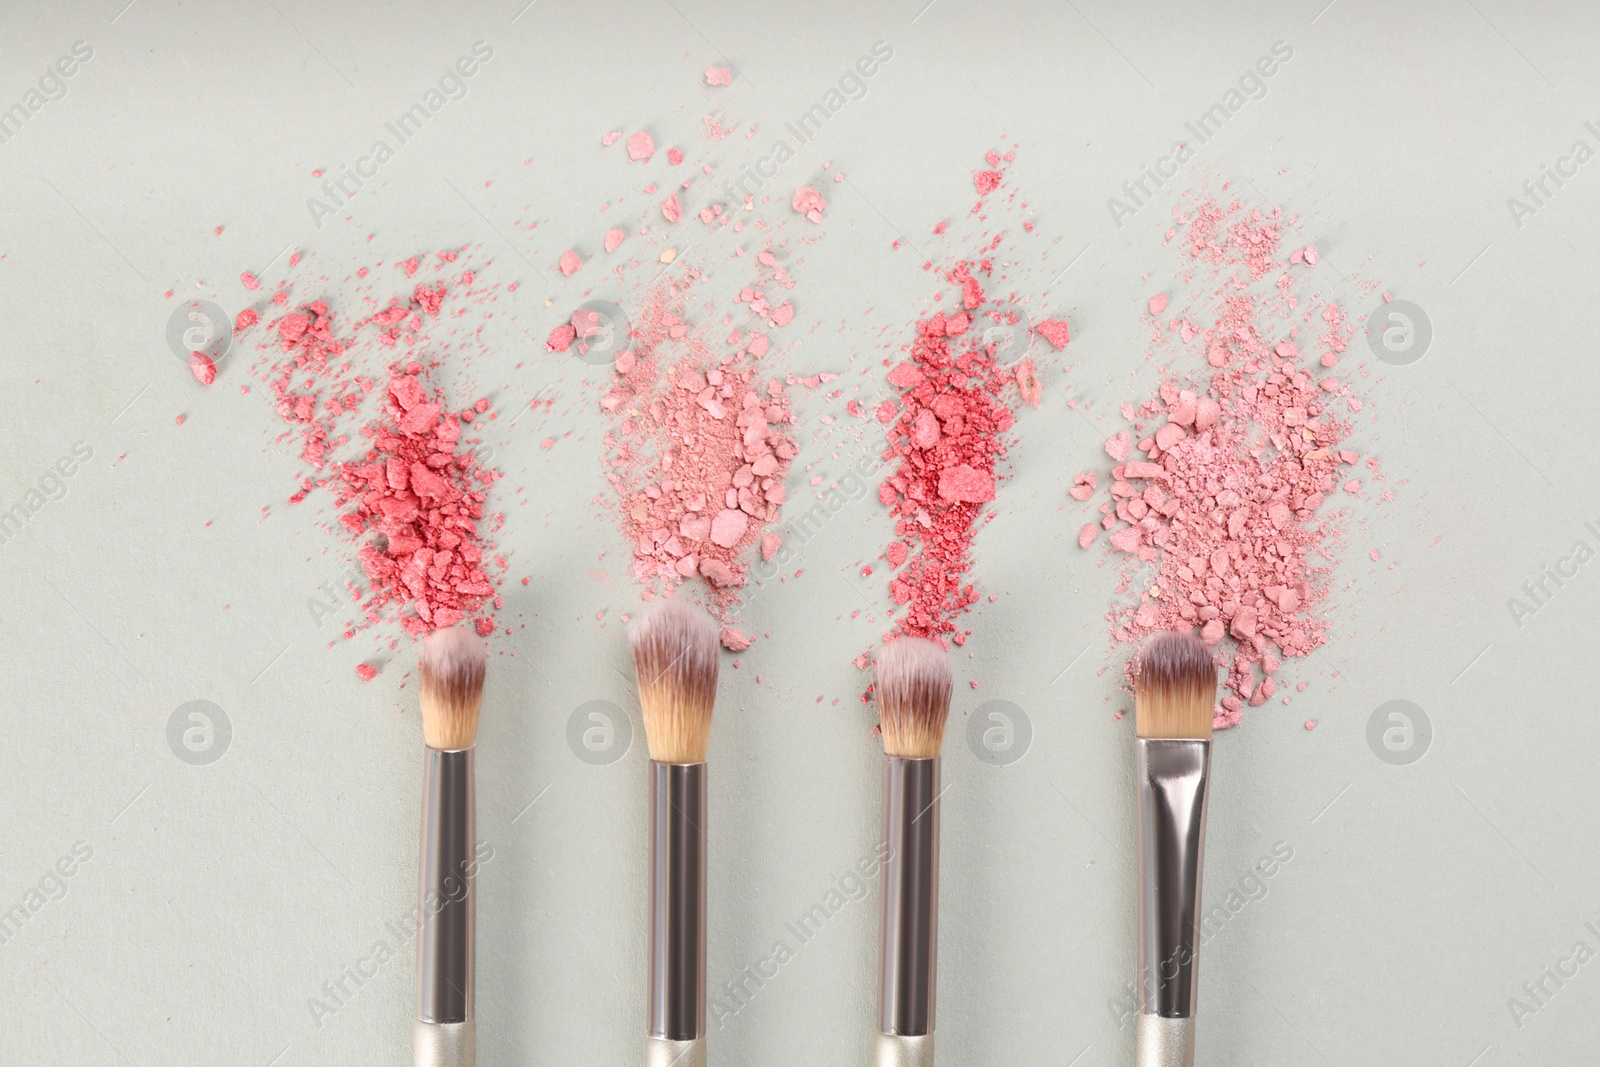 Photo of Makeup brushes and scattered eye shadows on light grey background, flat lay